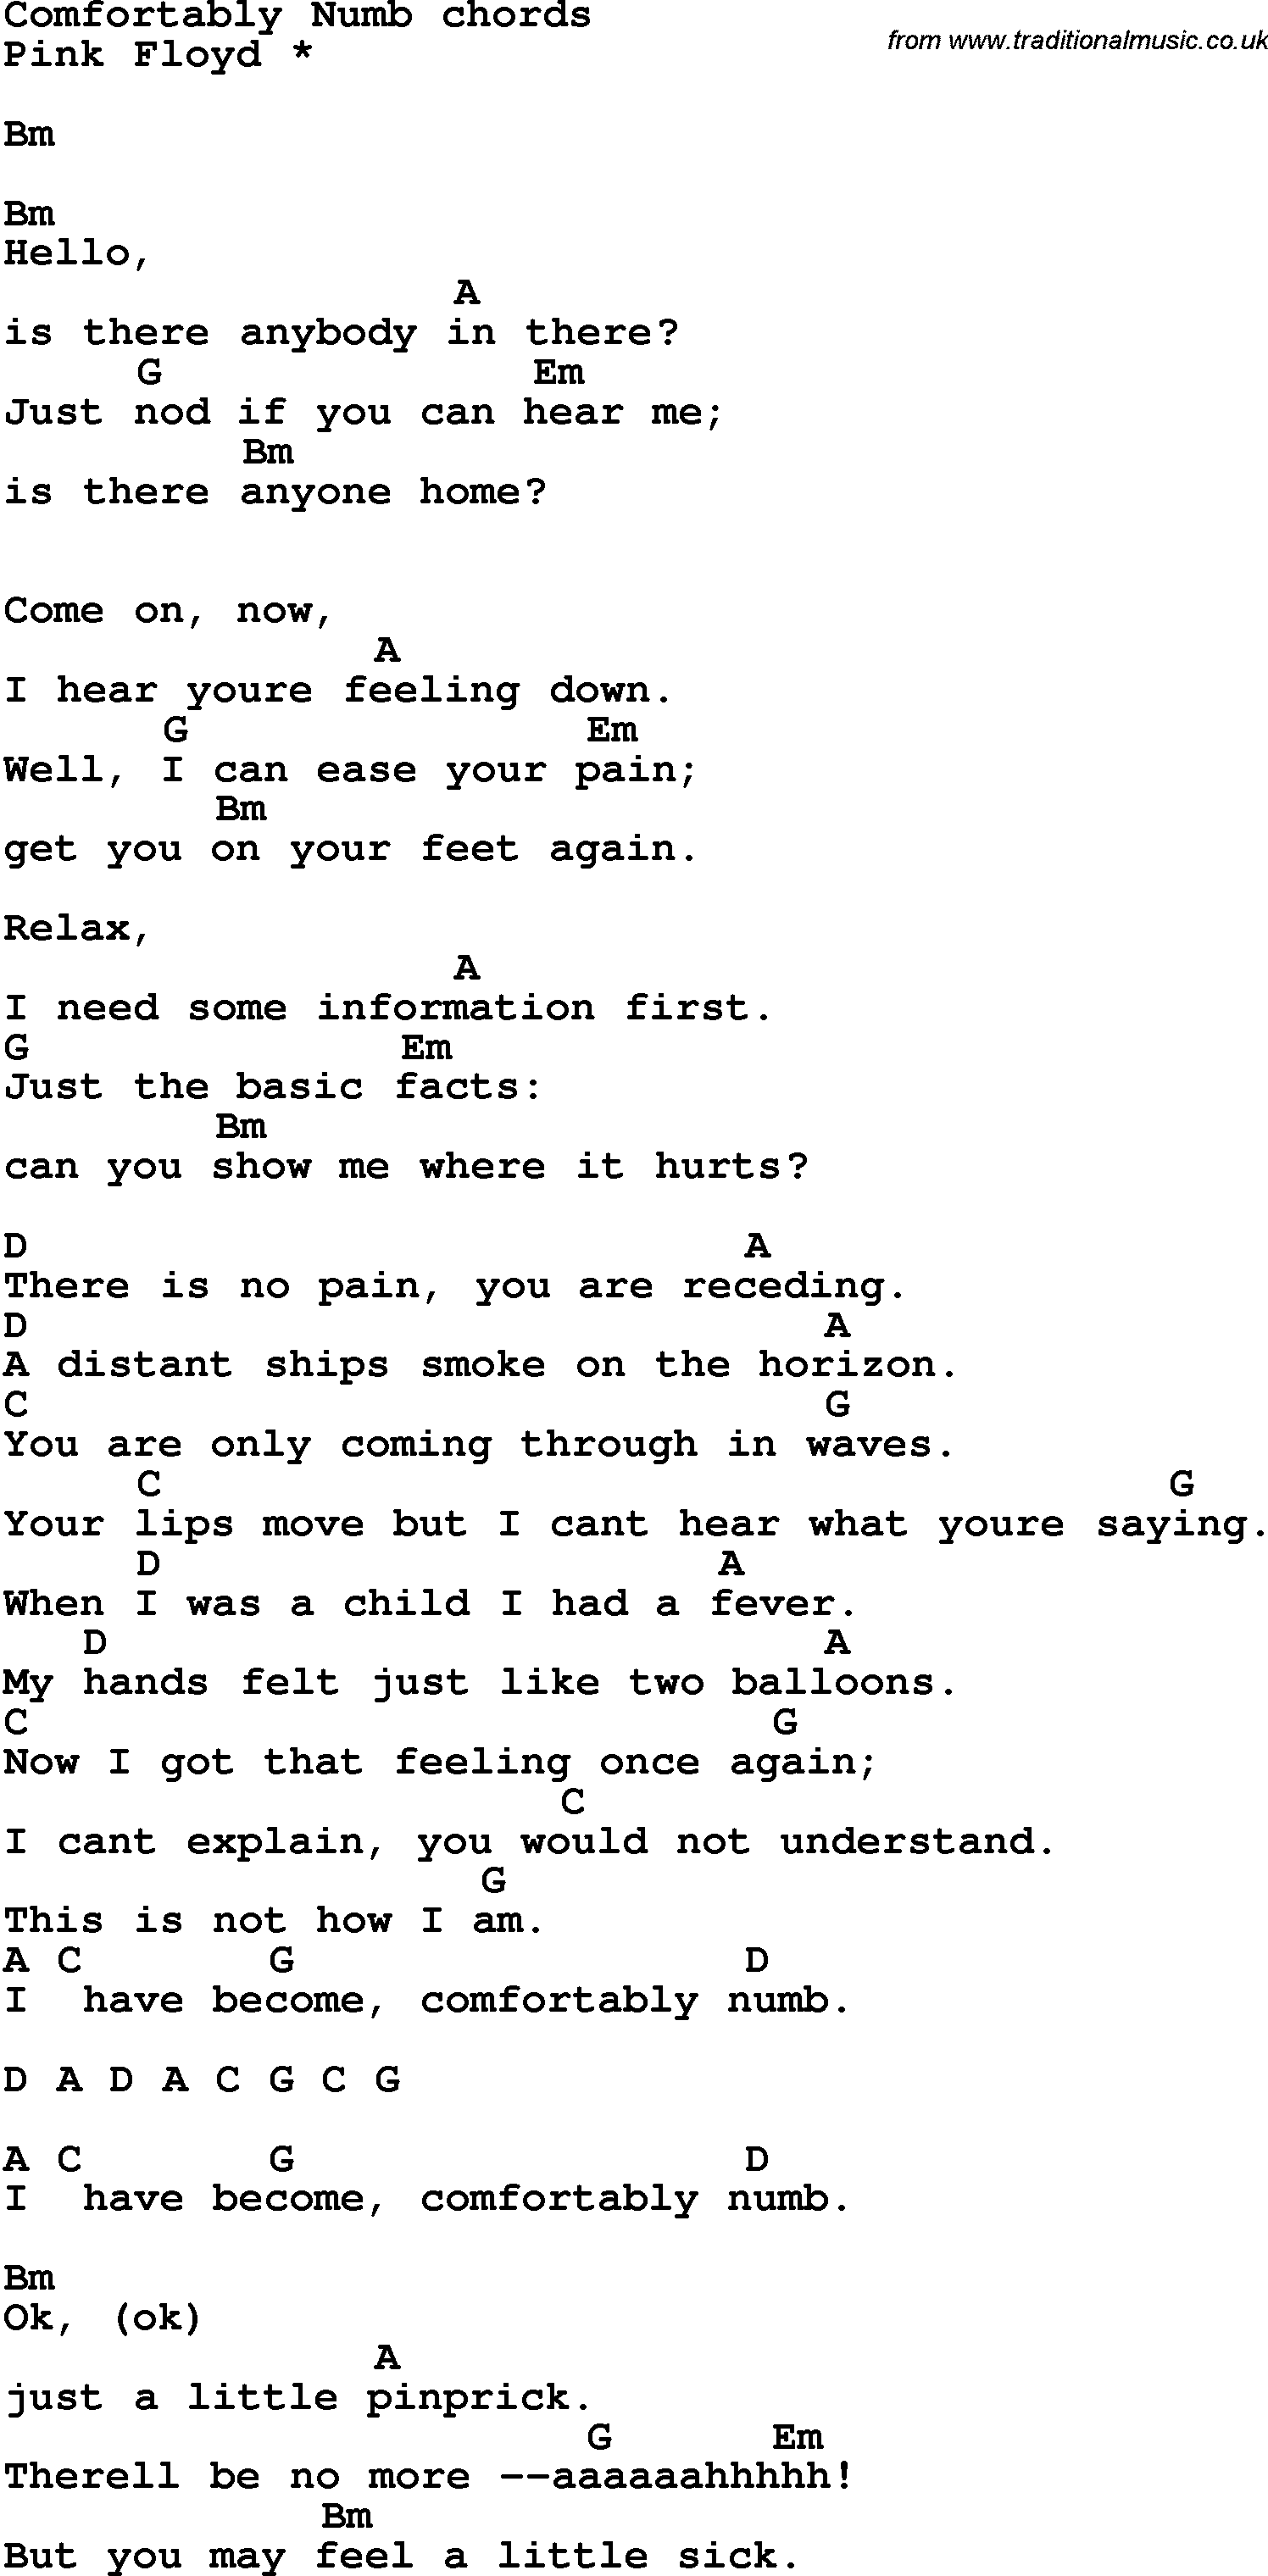 Song Lyrics with guitar chords for Comfortably Numb